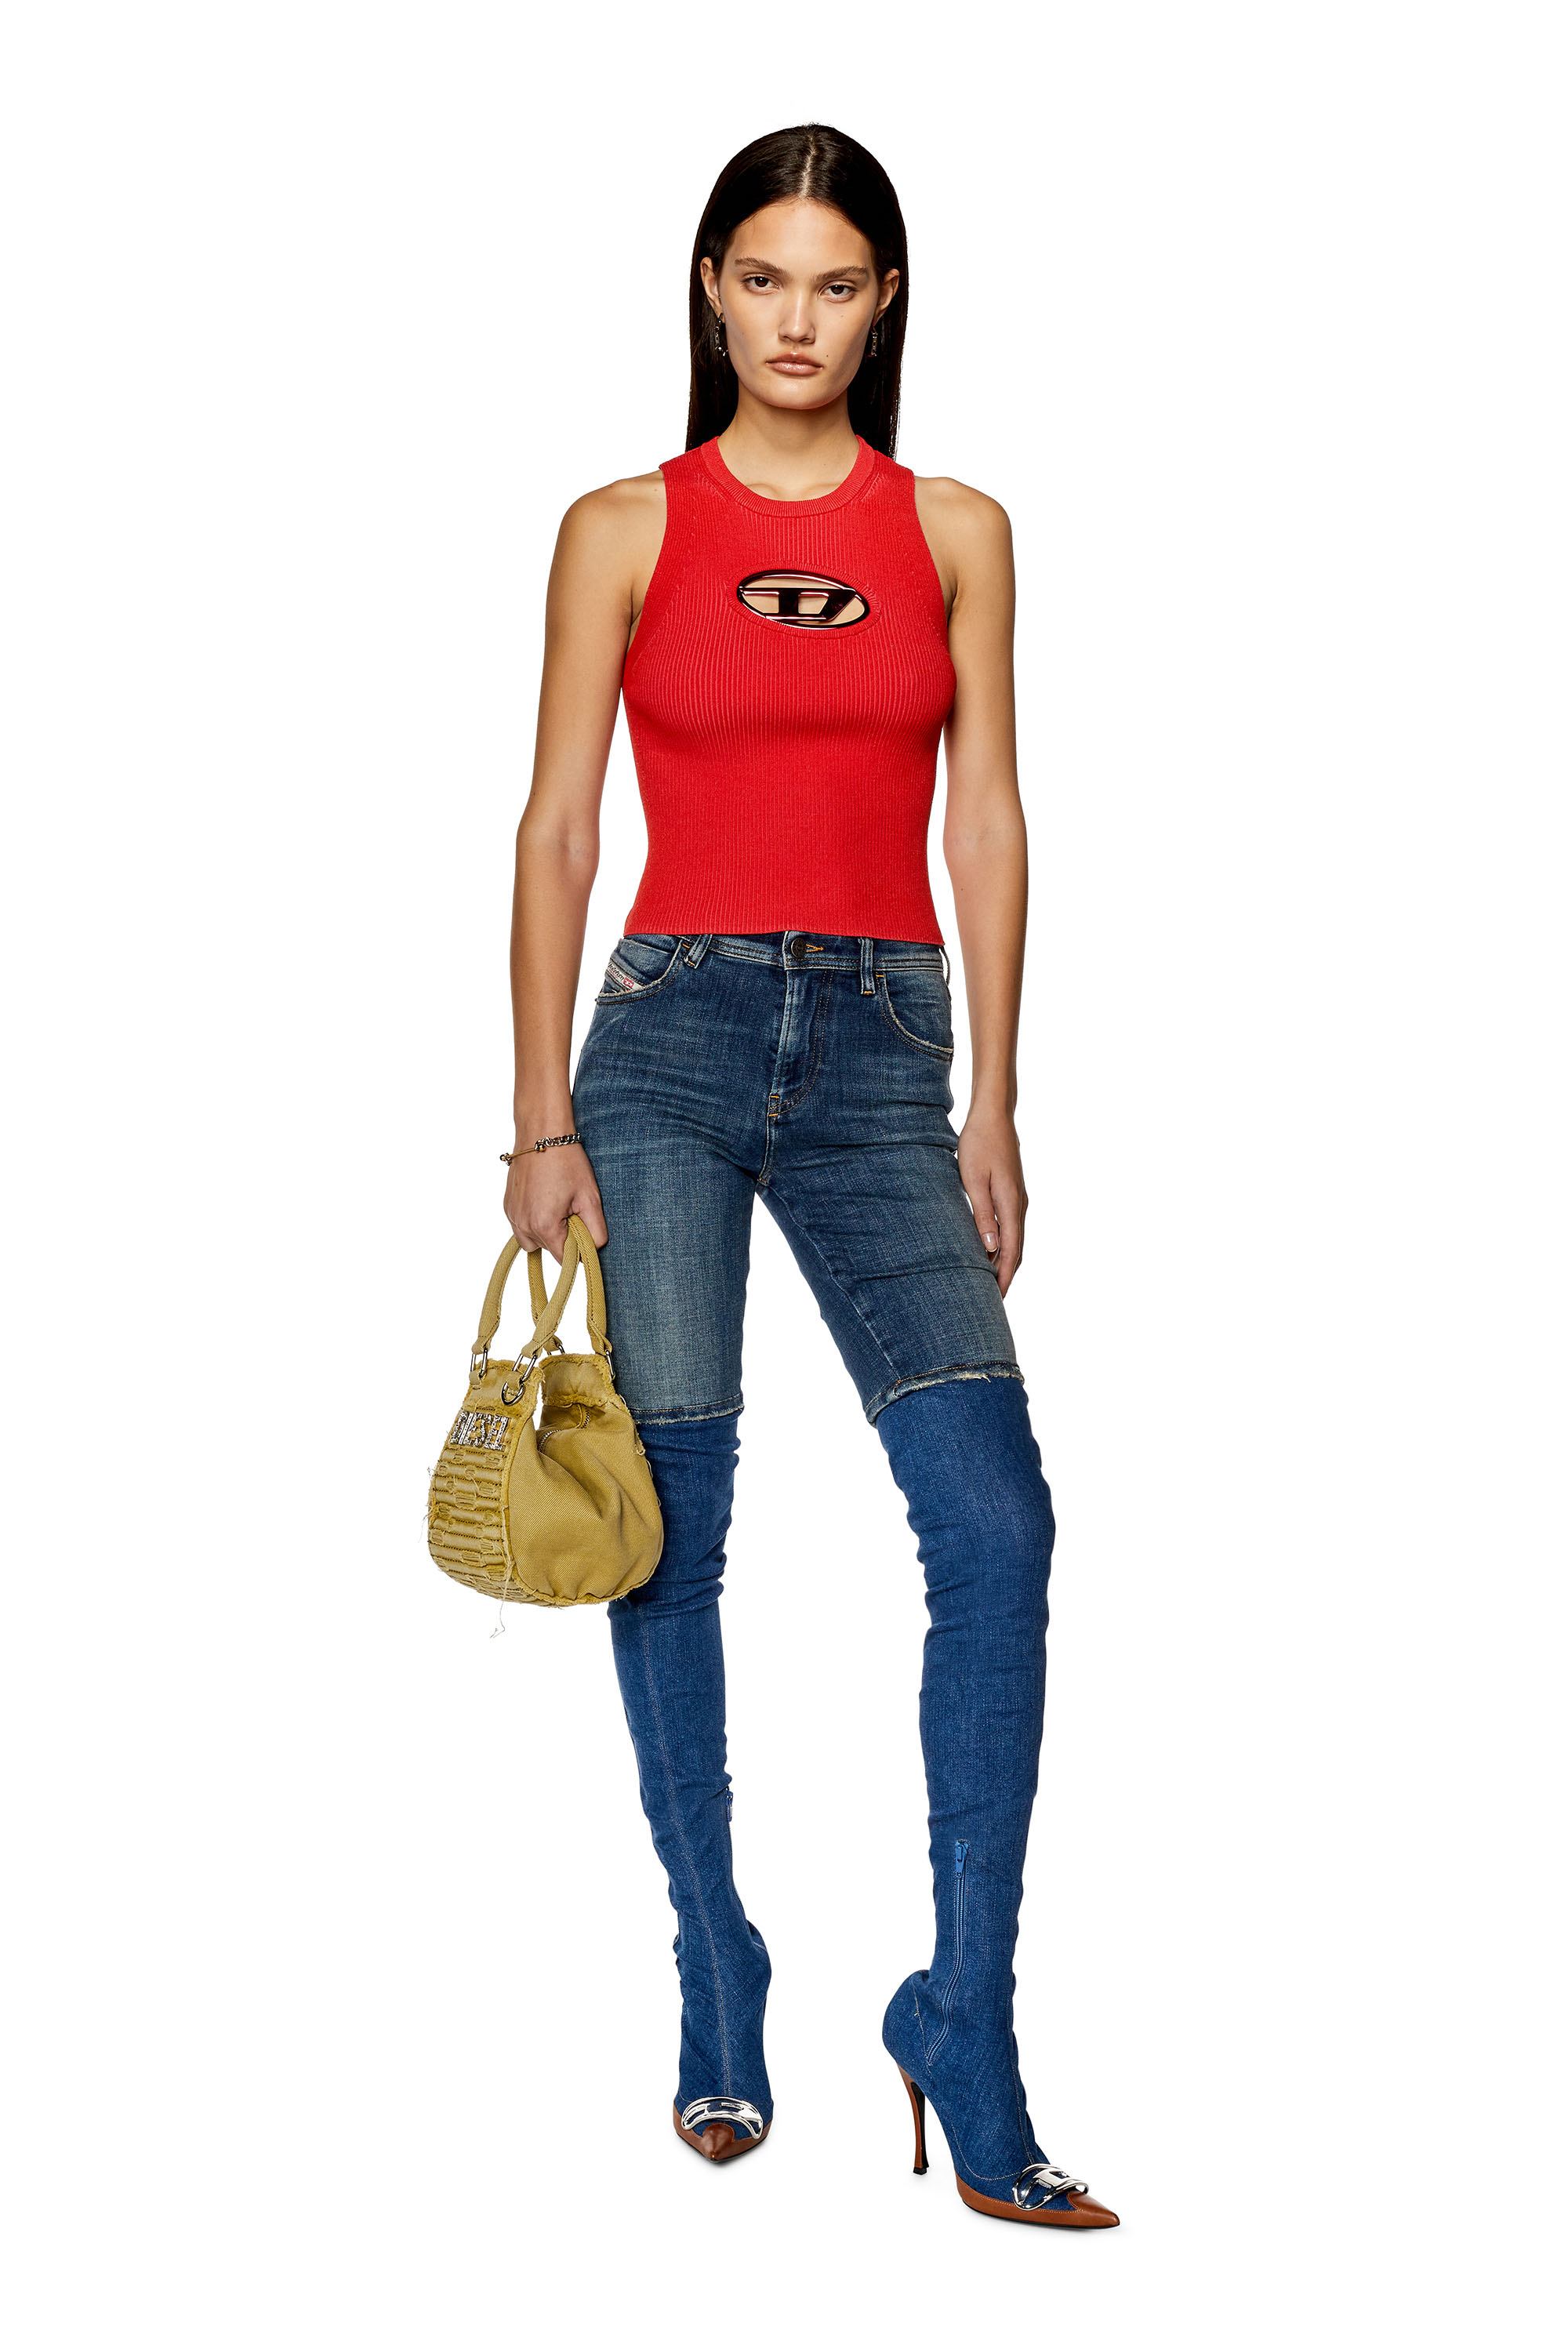 M-ONERVA-TOP Woman: Cut-out knit top with logo plaque | Diesel